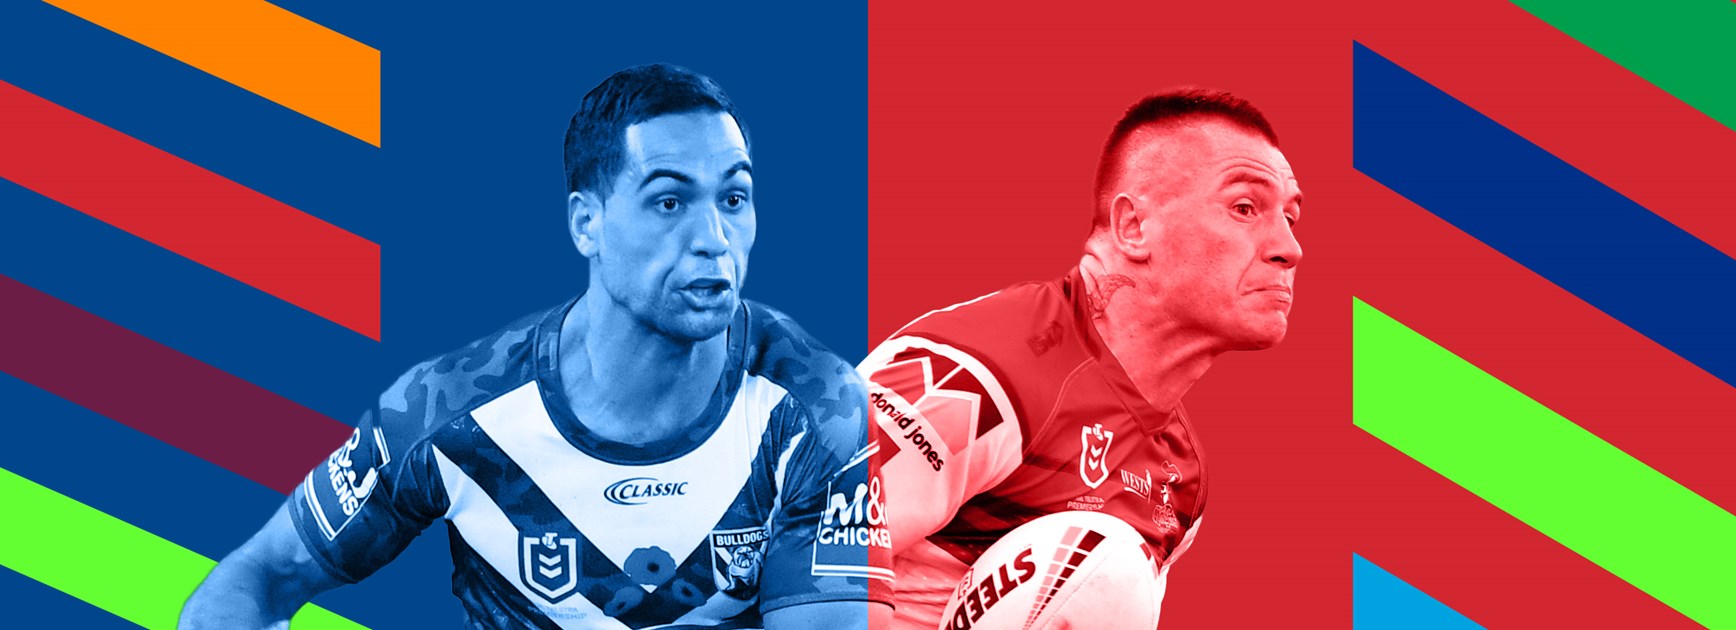 Head to head: Old team mate tussle, old dog chaos